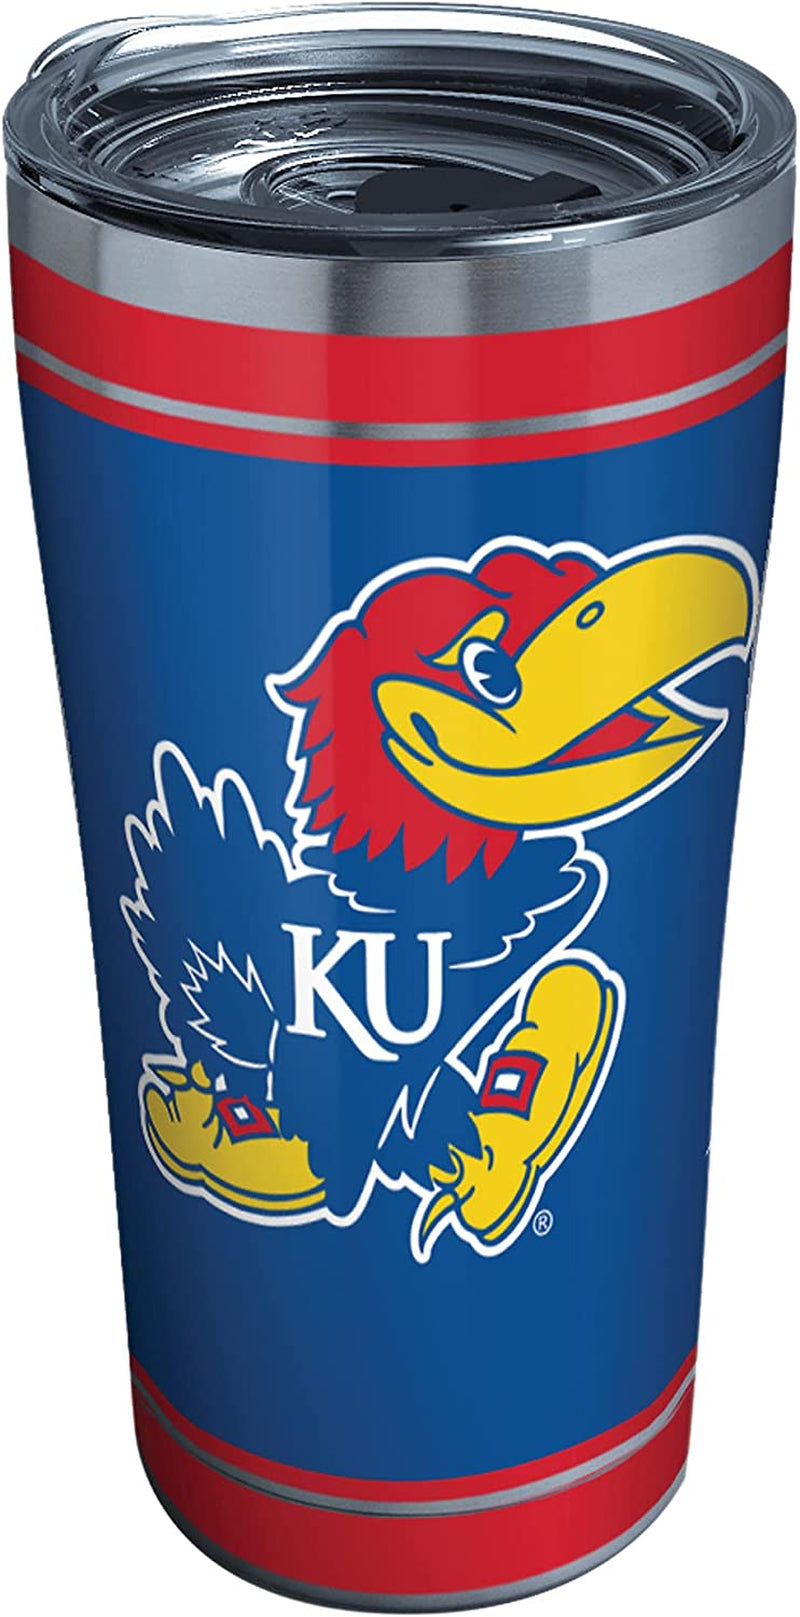 Tervis Triple Walled University of Kansas UK Jayhawks Insulated Tumbler Cup Keeps Drinks Cold & Hot, 20Oz - Stainless Steel, Campus